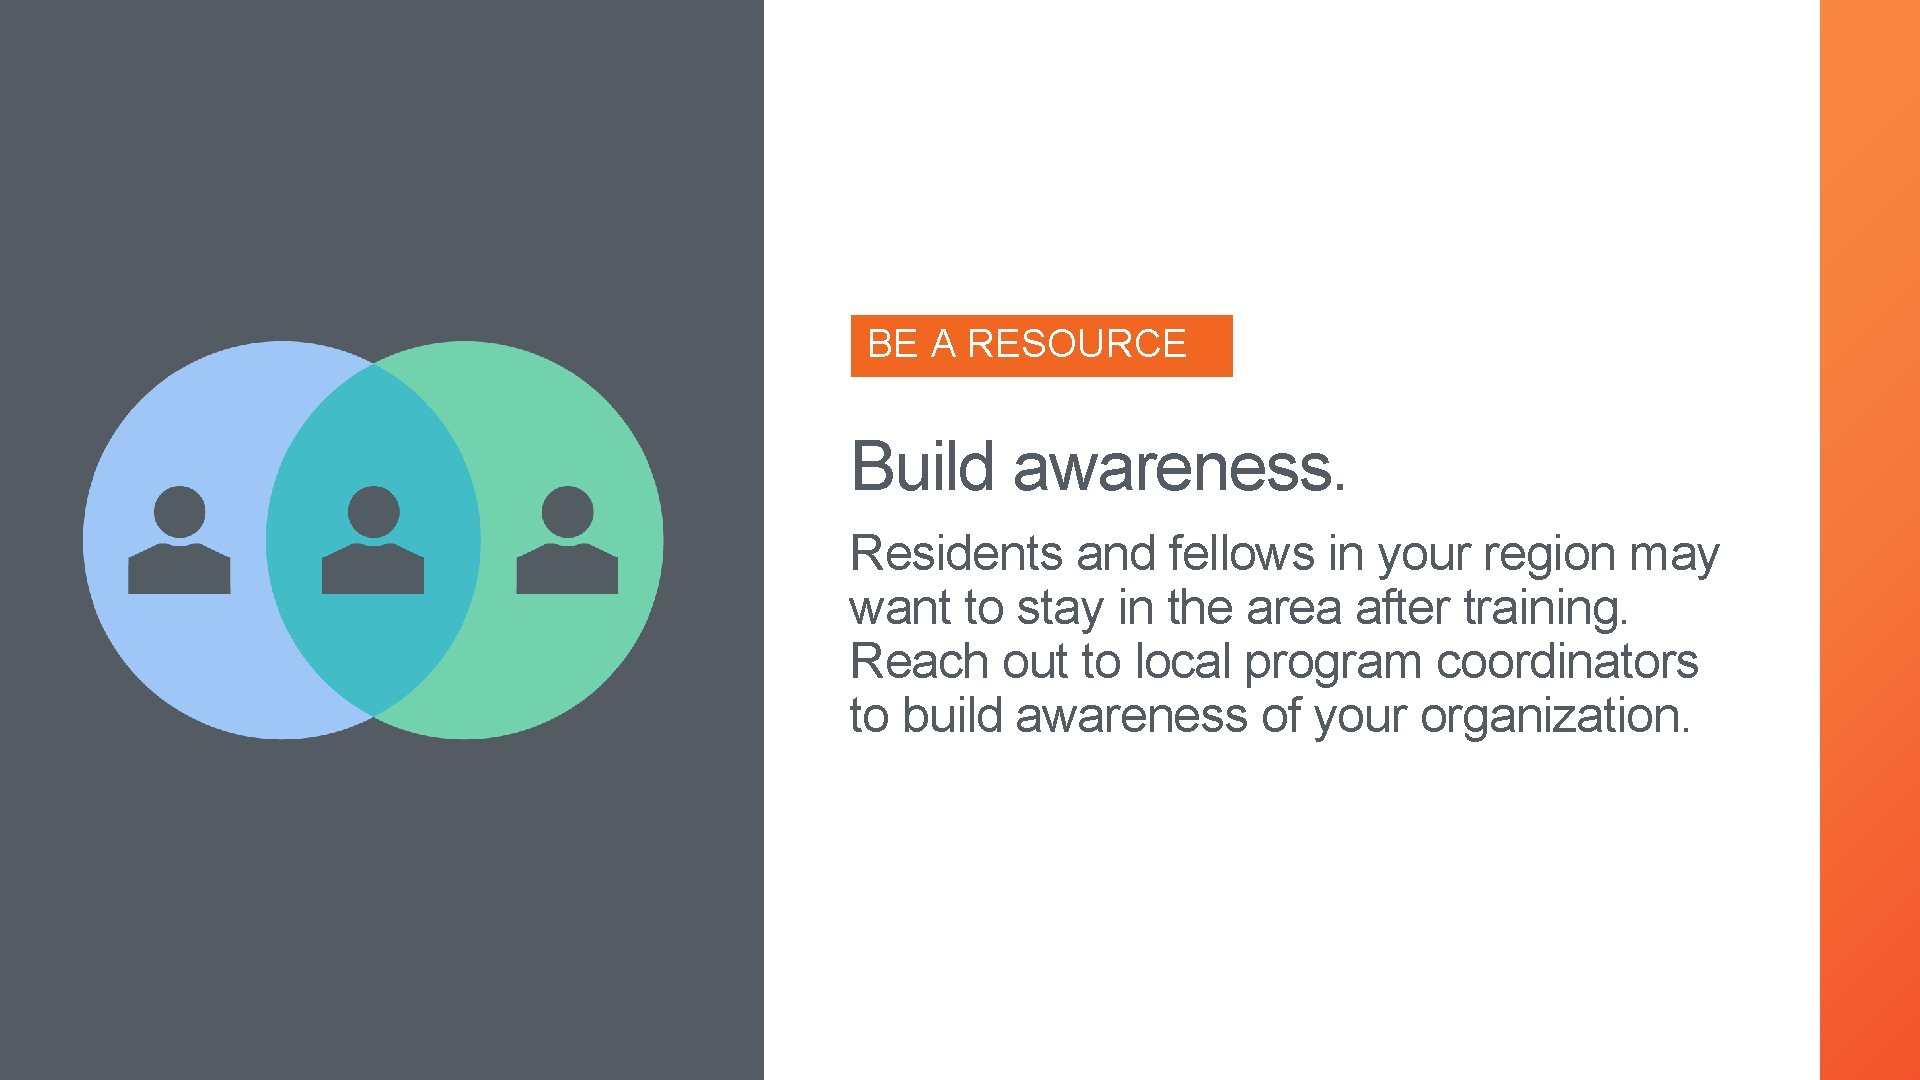 BE A RESOURCE Build awareness. Residents and fellows in your region may want to